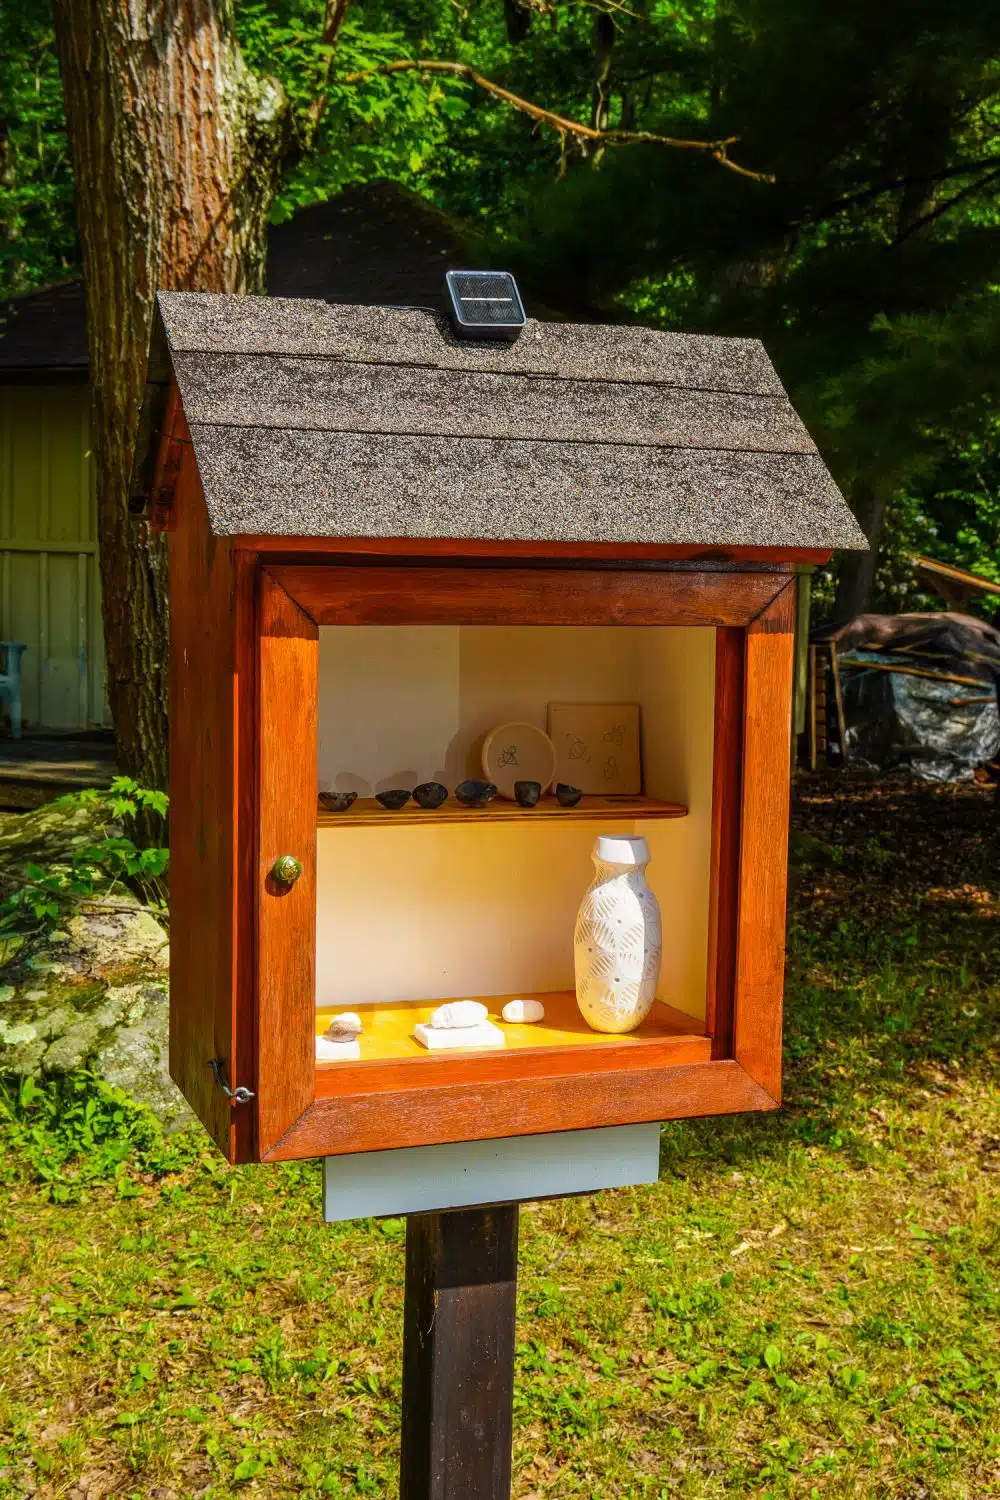 Instead of a "Little Free Library" for books -- for crafts!